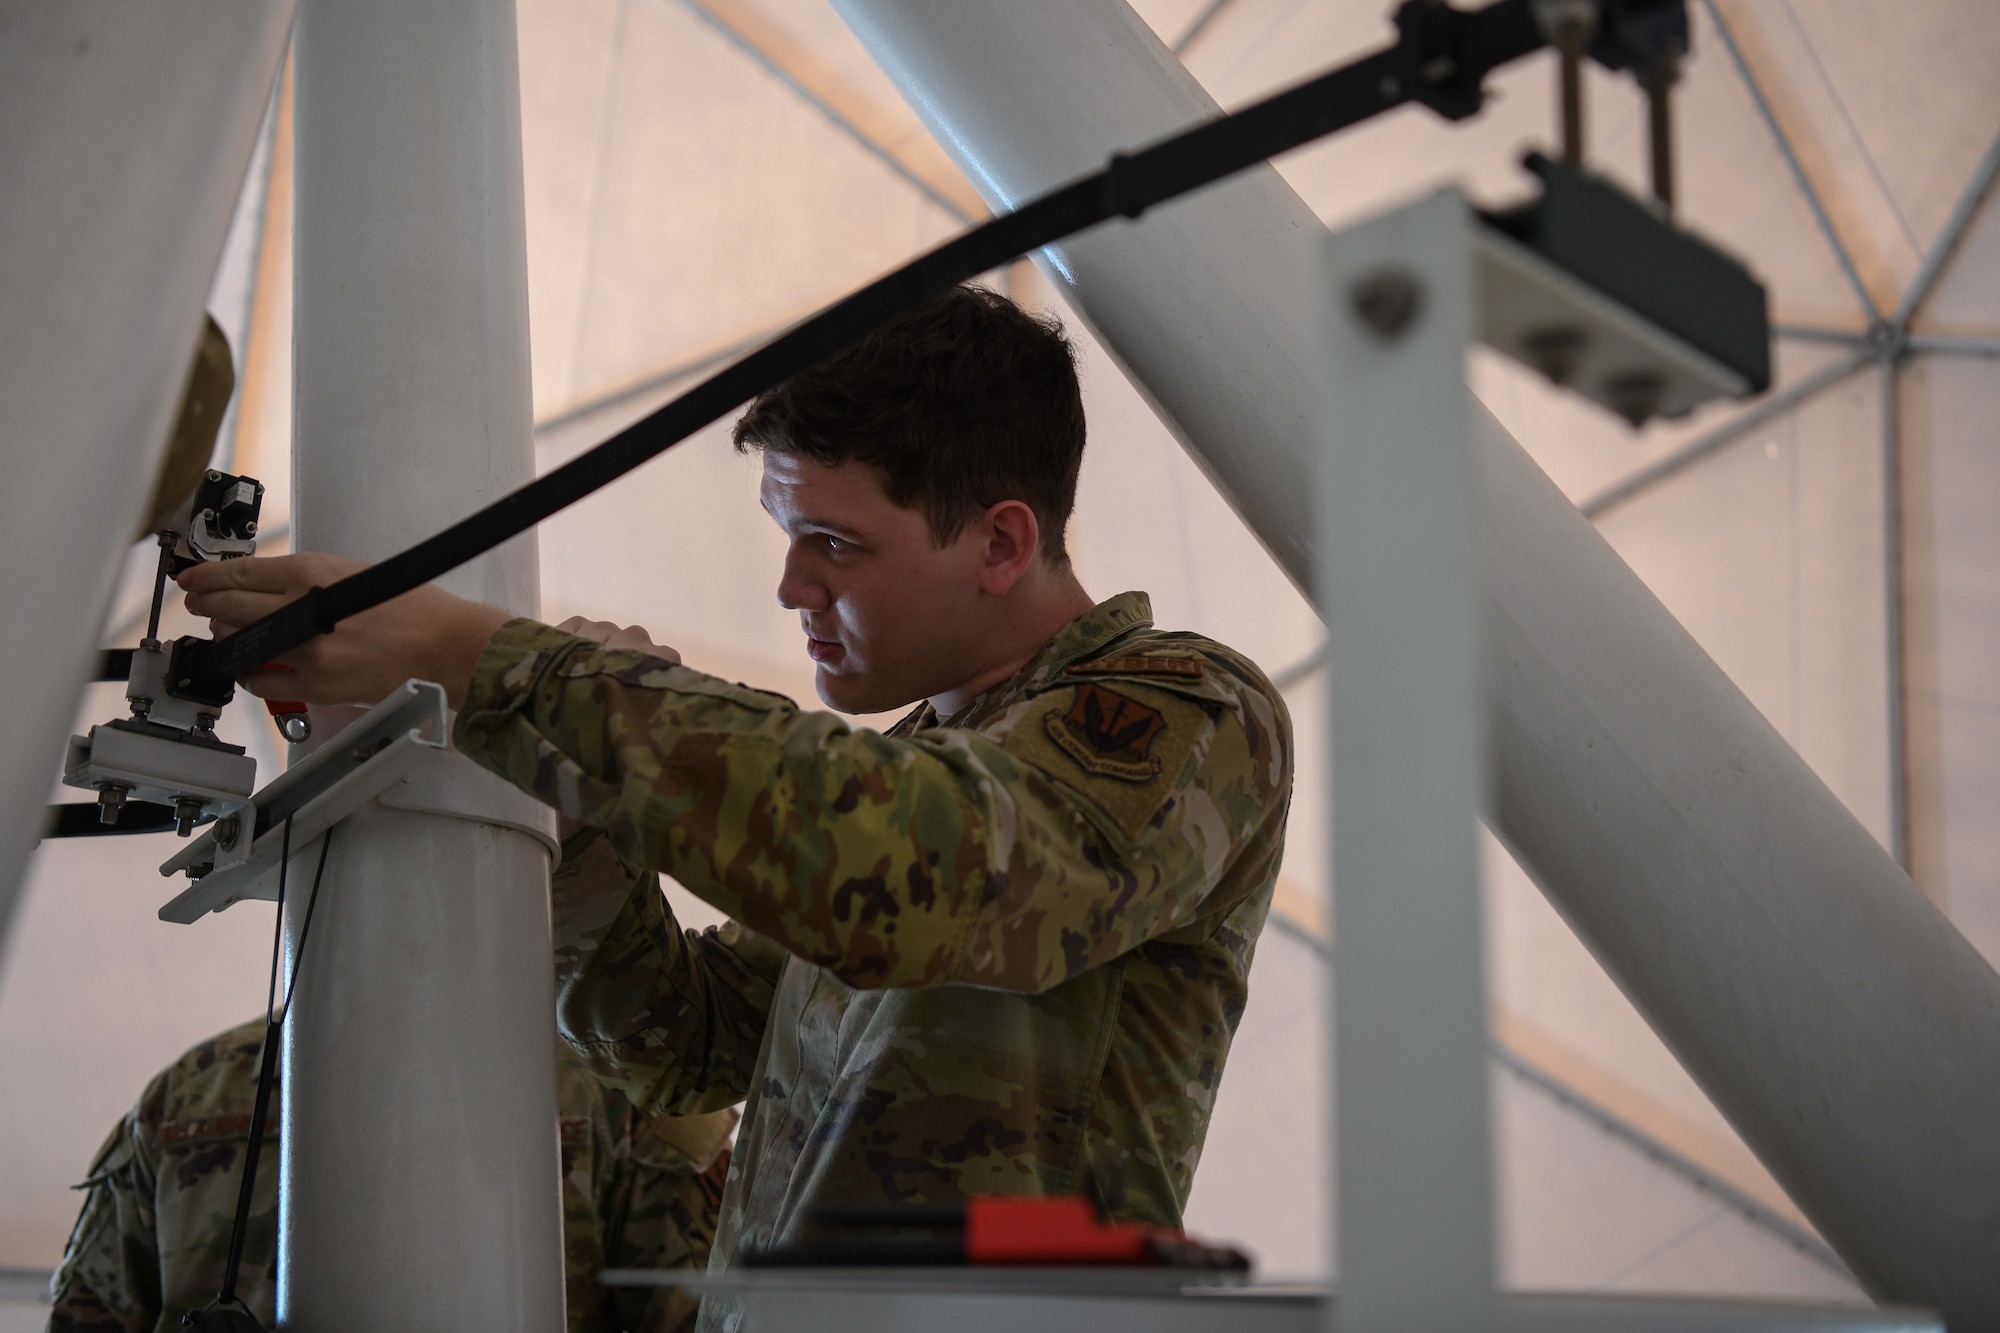 A male airman in a green uniform conducts maintenance on a white beam.